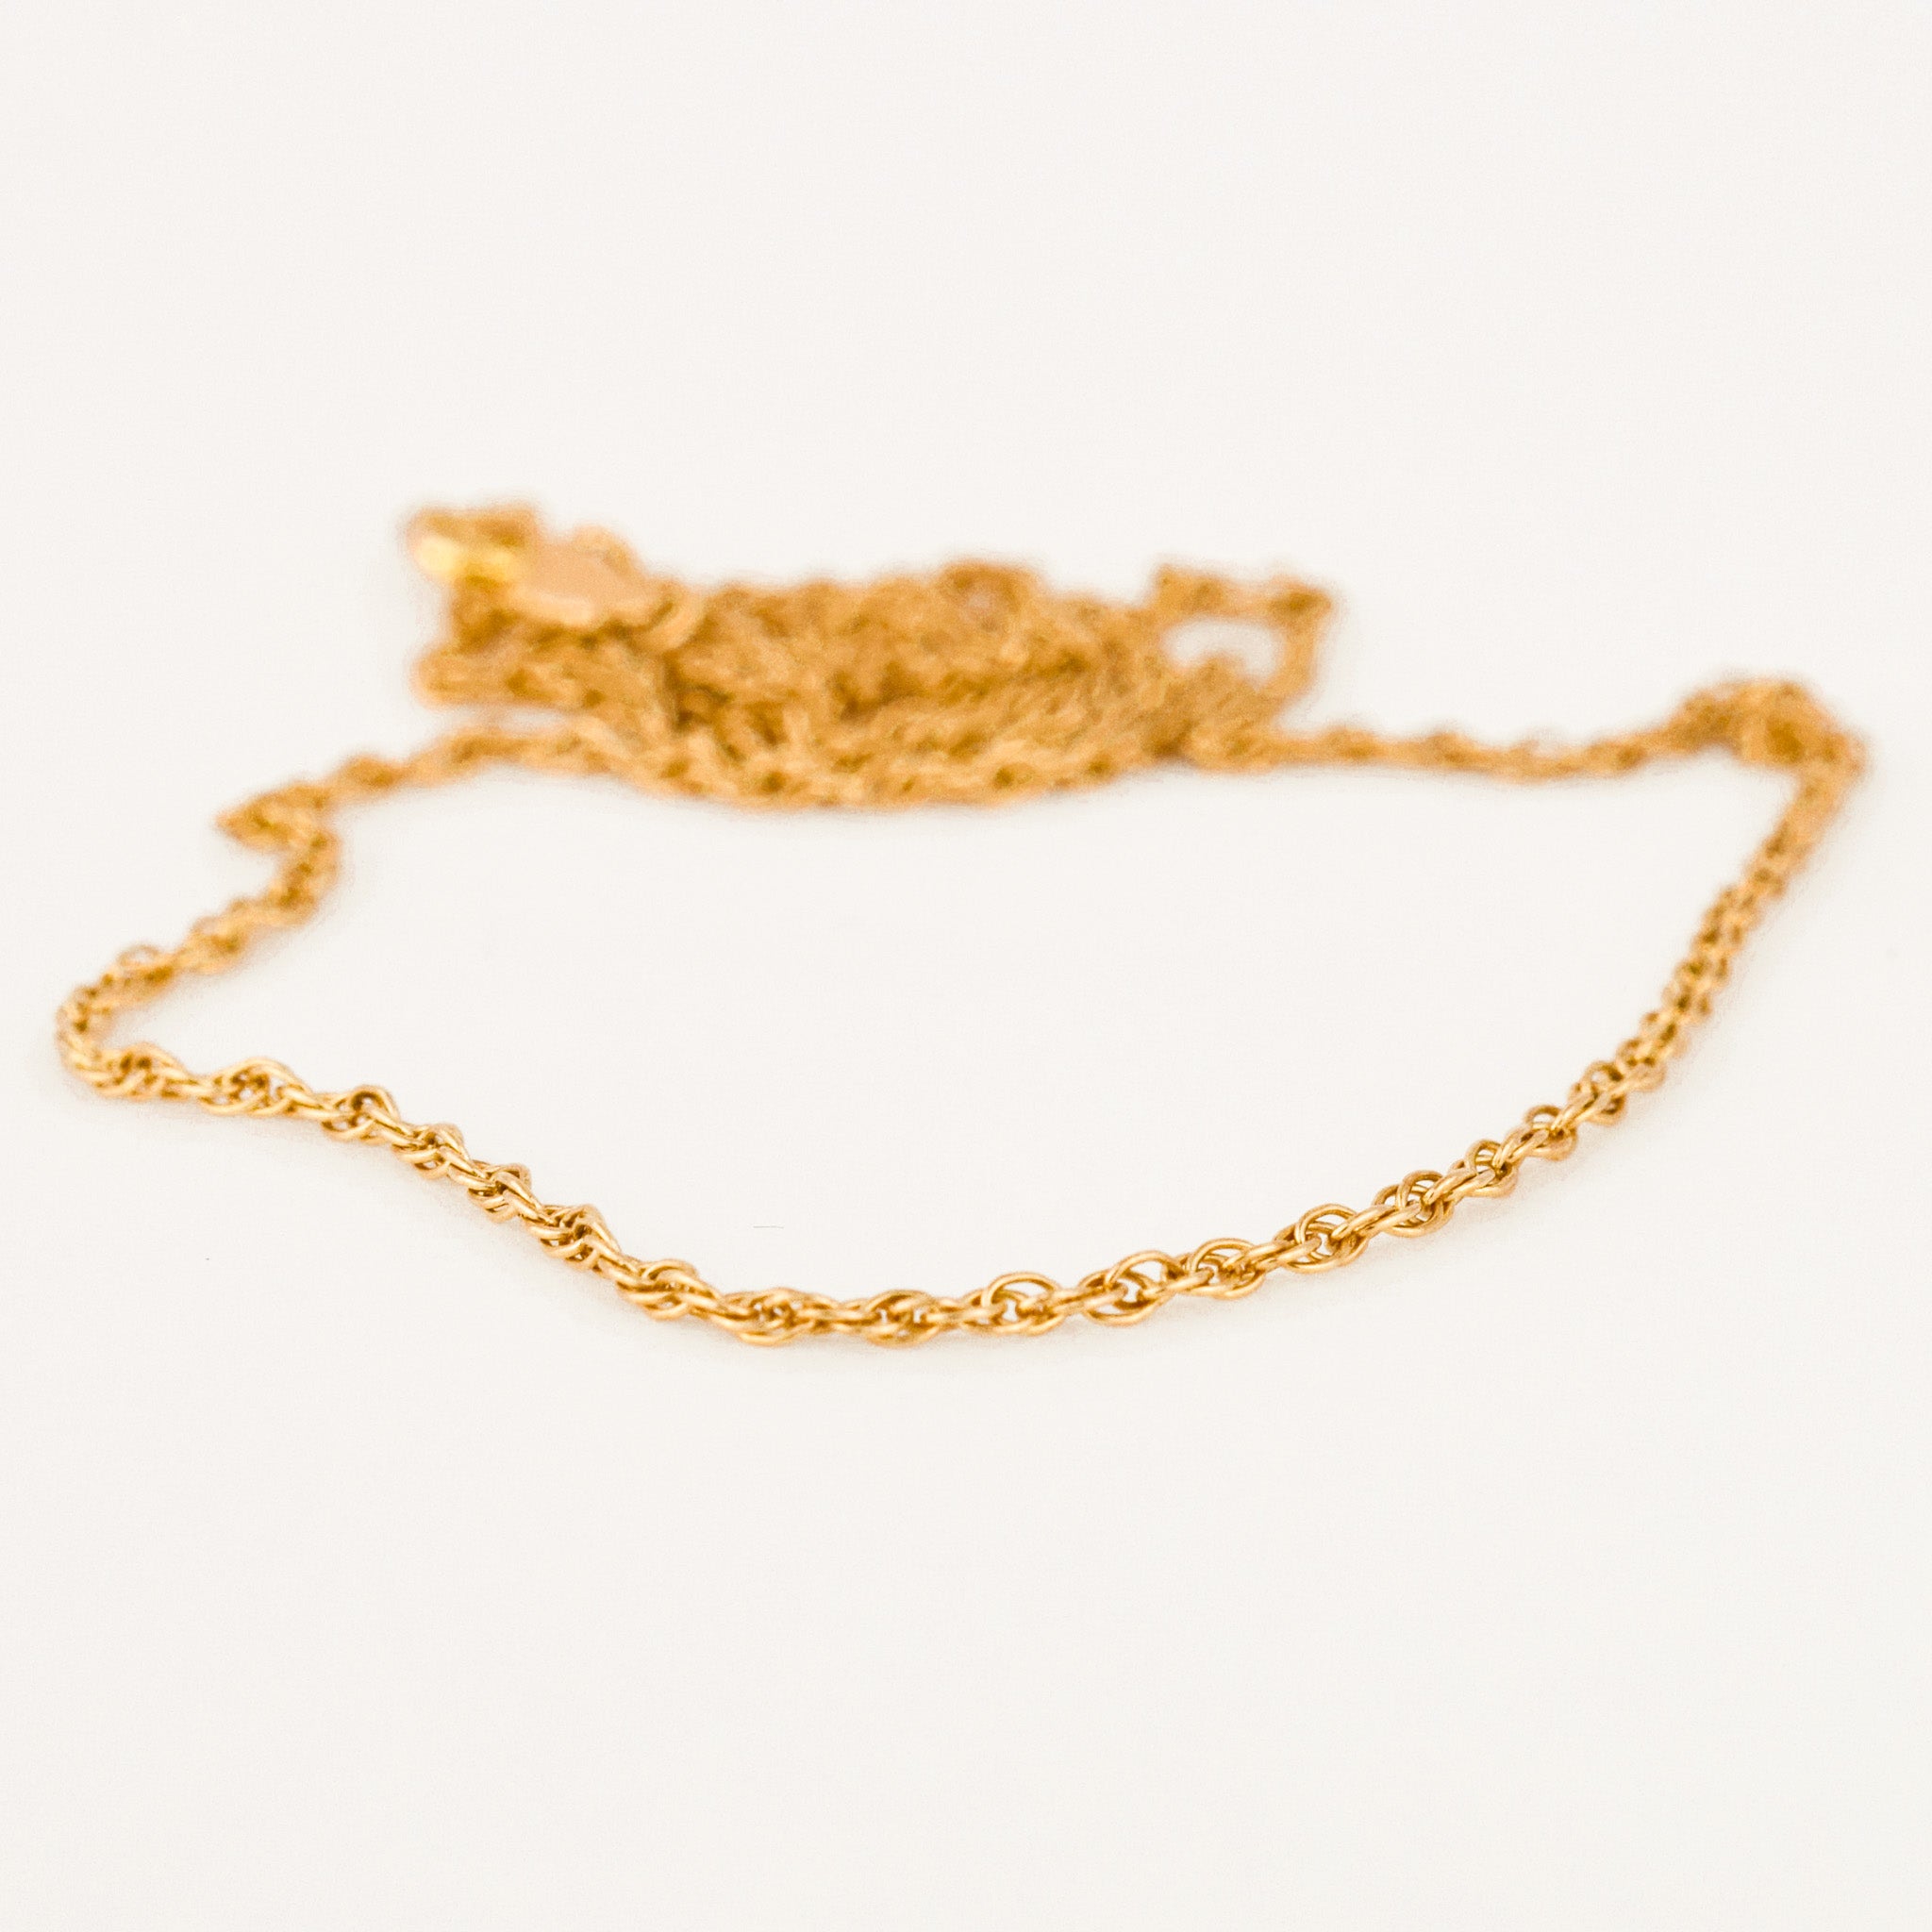 16.25" Dainty Rope Chain Necklace